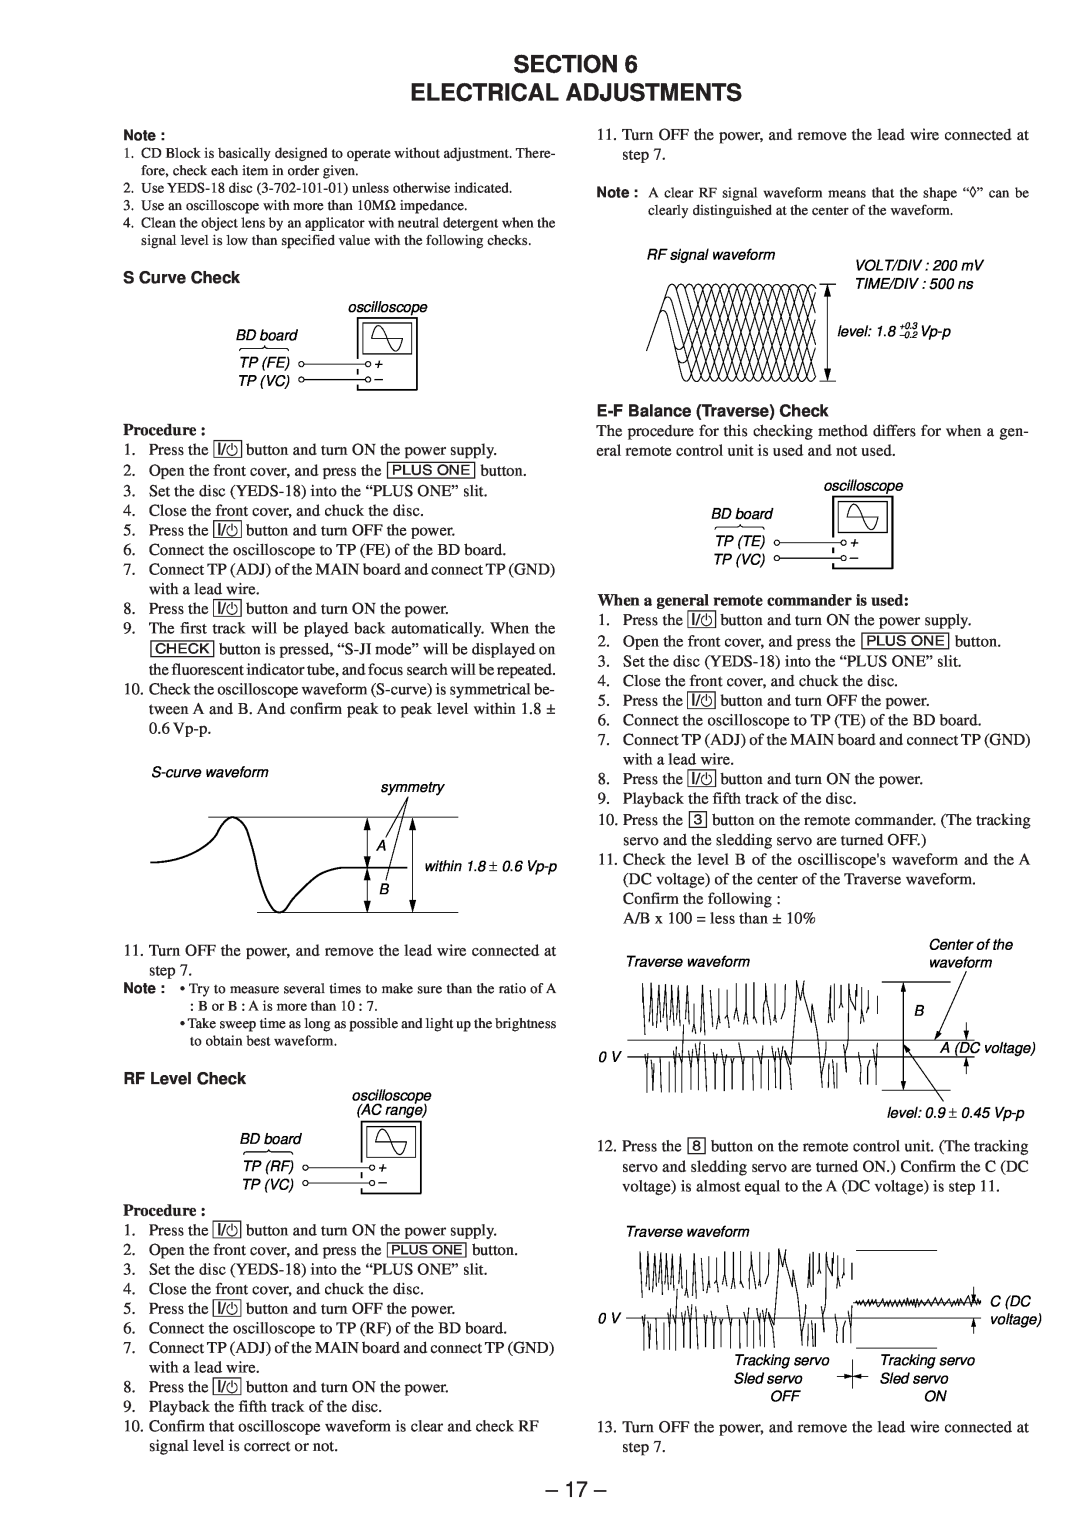 Technicolor - Thomson CDP-CX57 service manual Section Electrical Adjustments, S Curve Check, Procedure, RF Level Check 